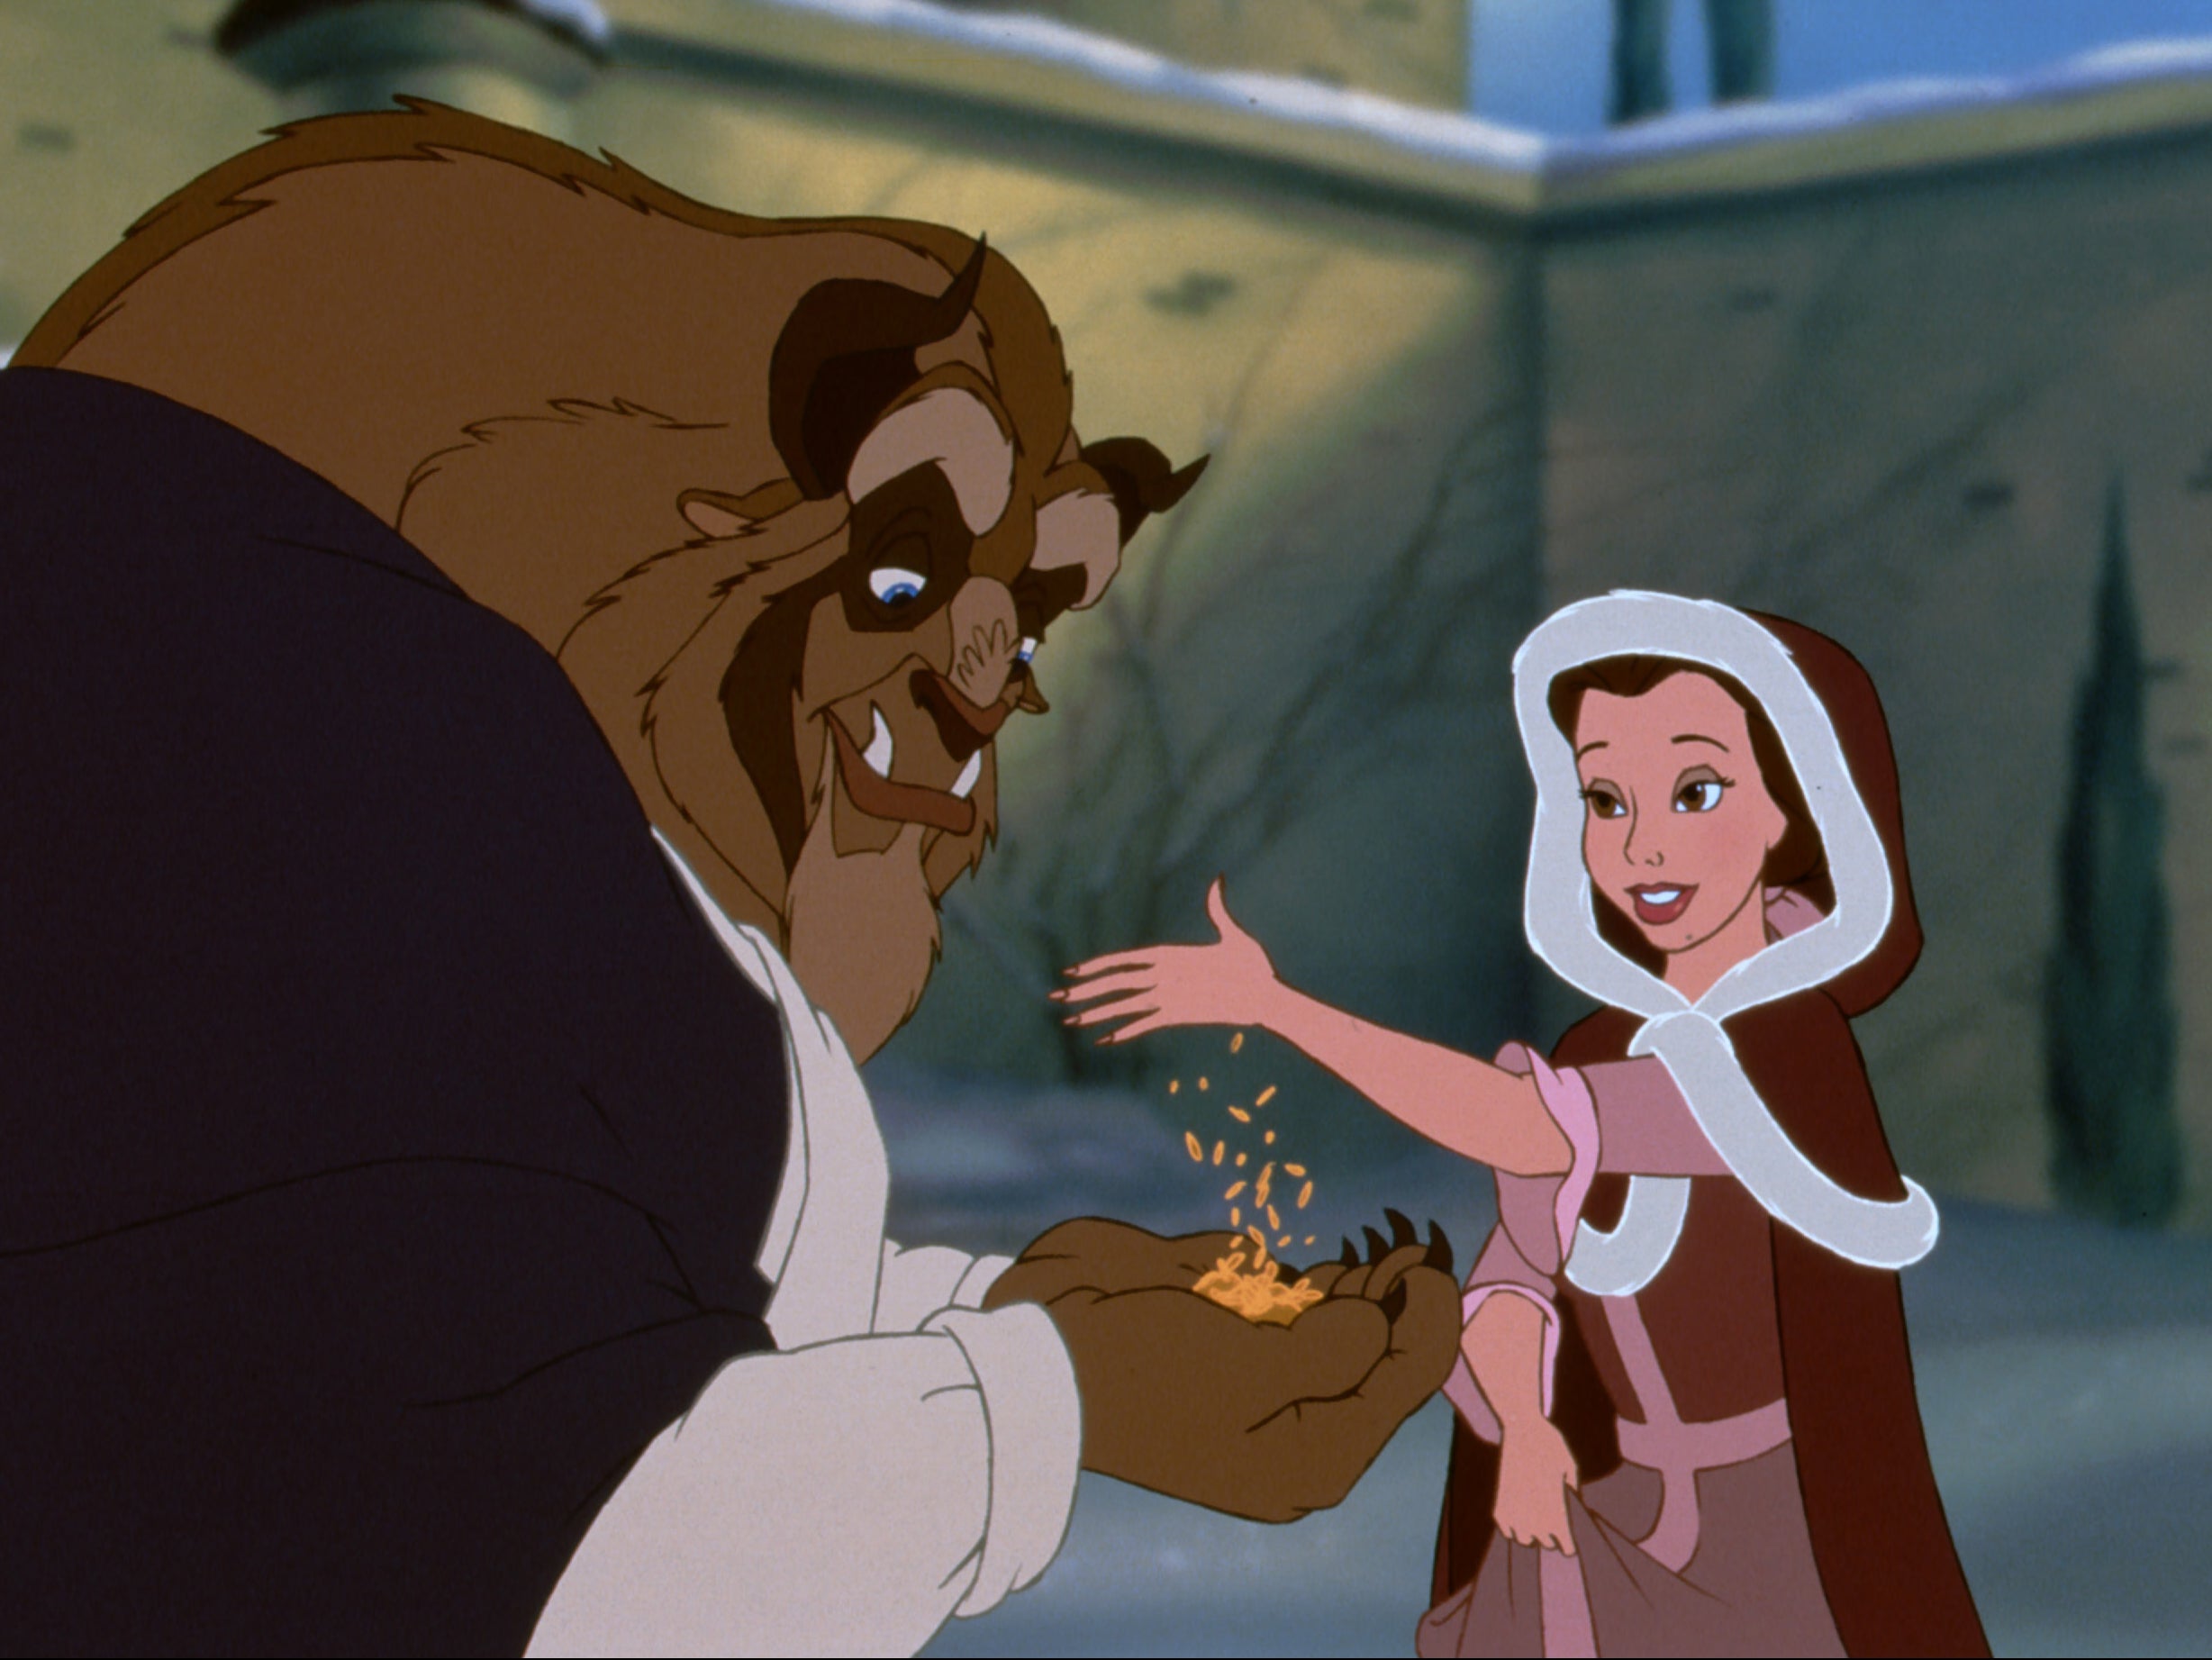 ‘Beauty and the Beast’ was released during the Disney Renaissance in the 1990s